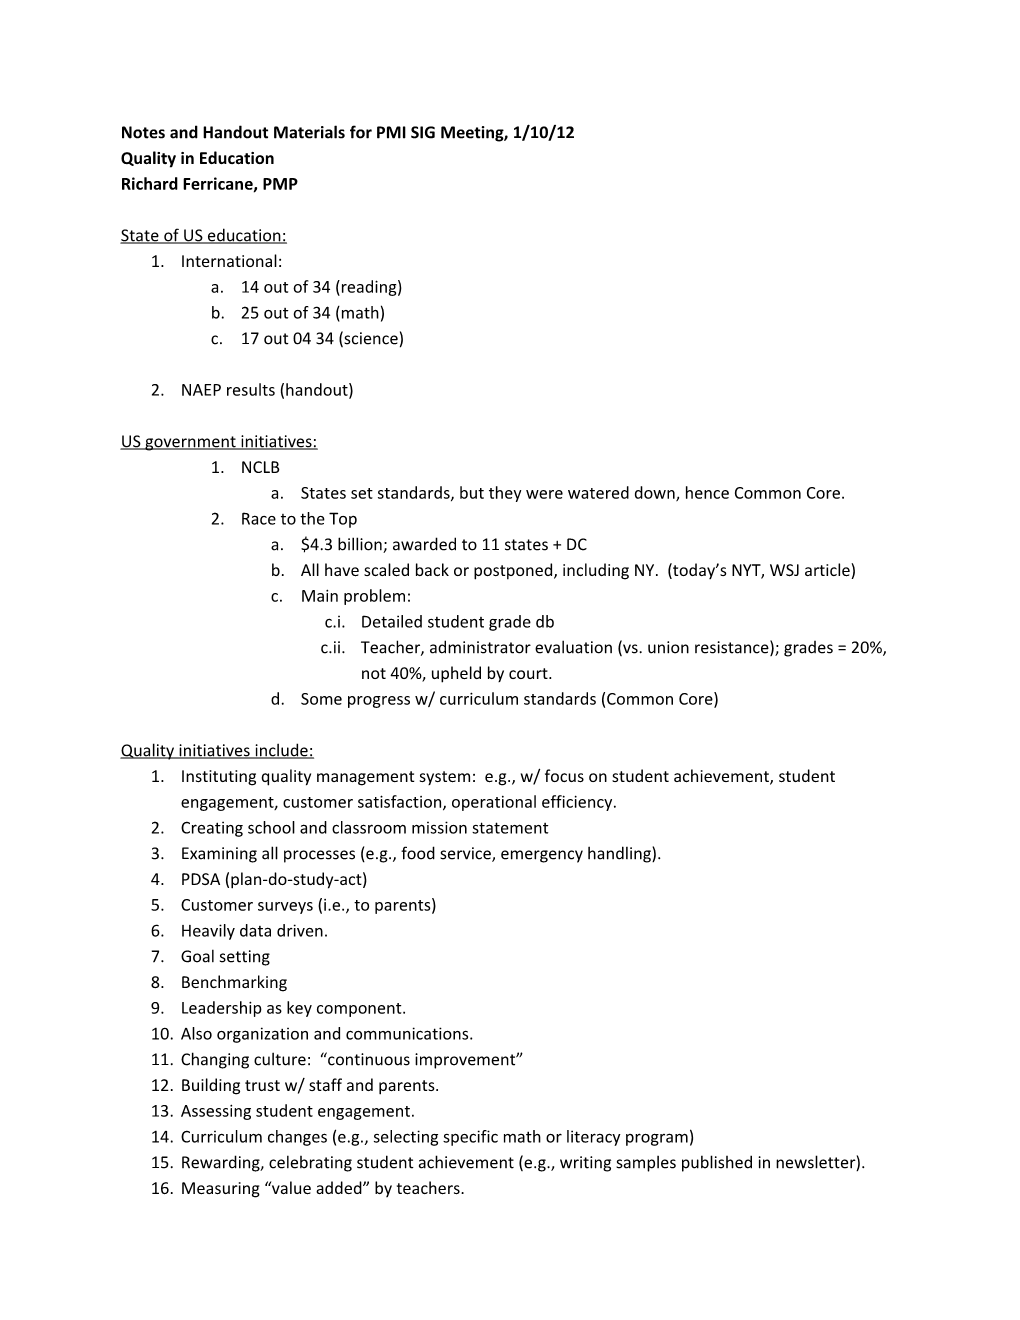 Notes for PMI SIG Meeting, 1/10/12